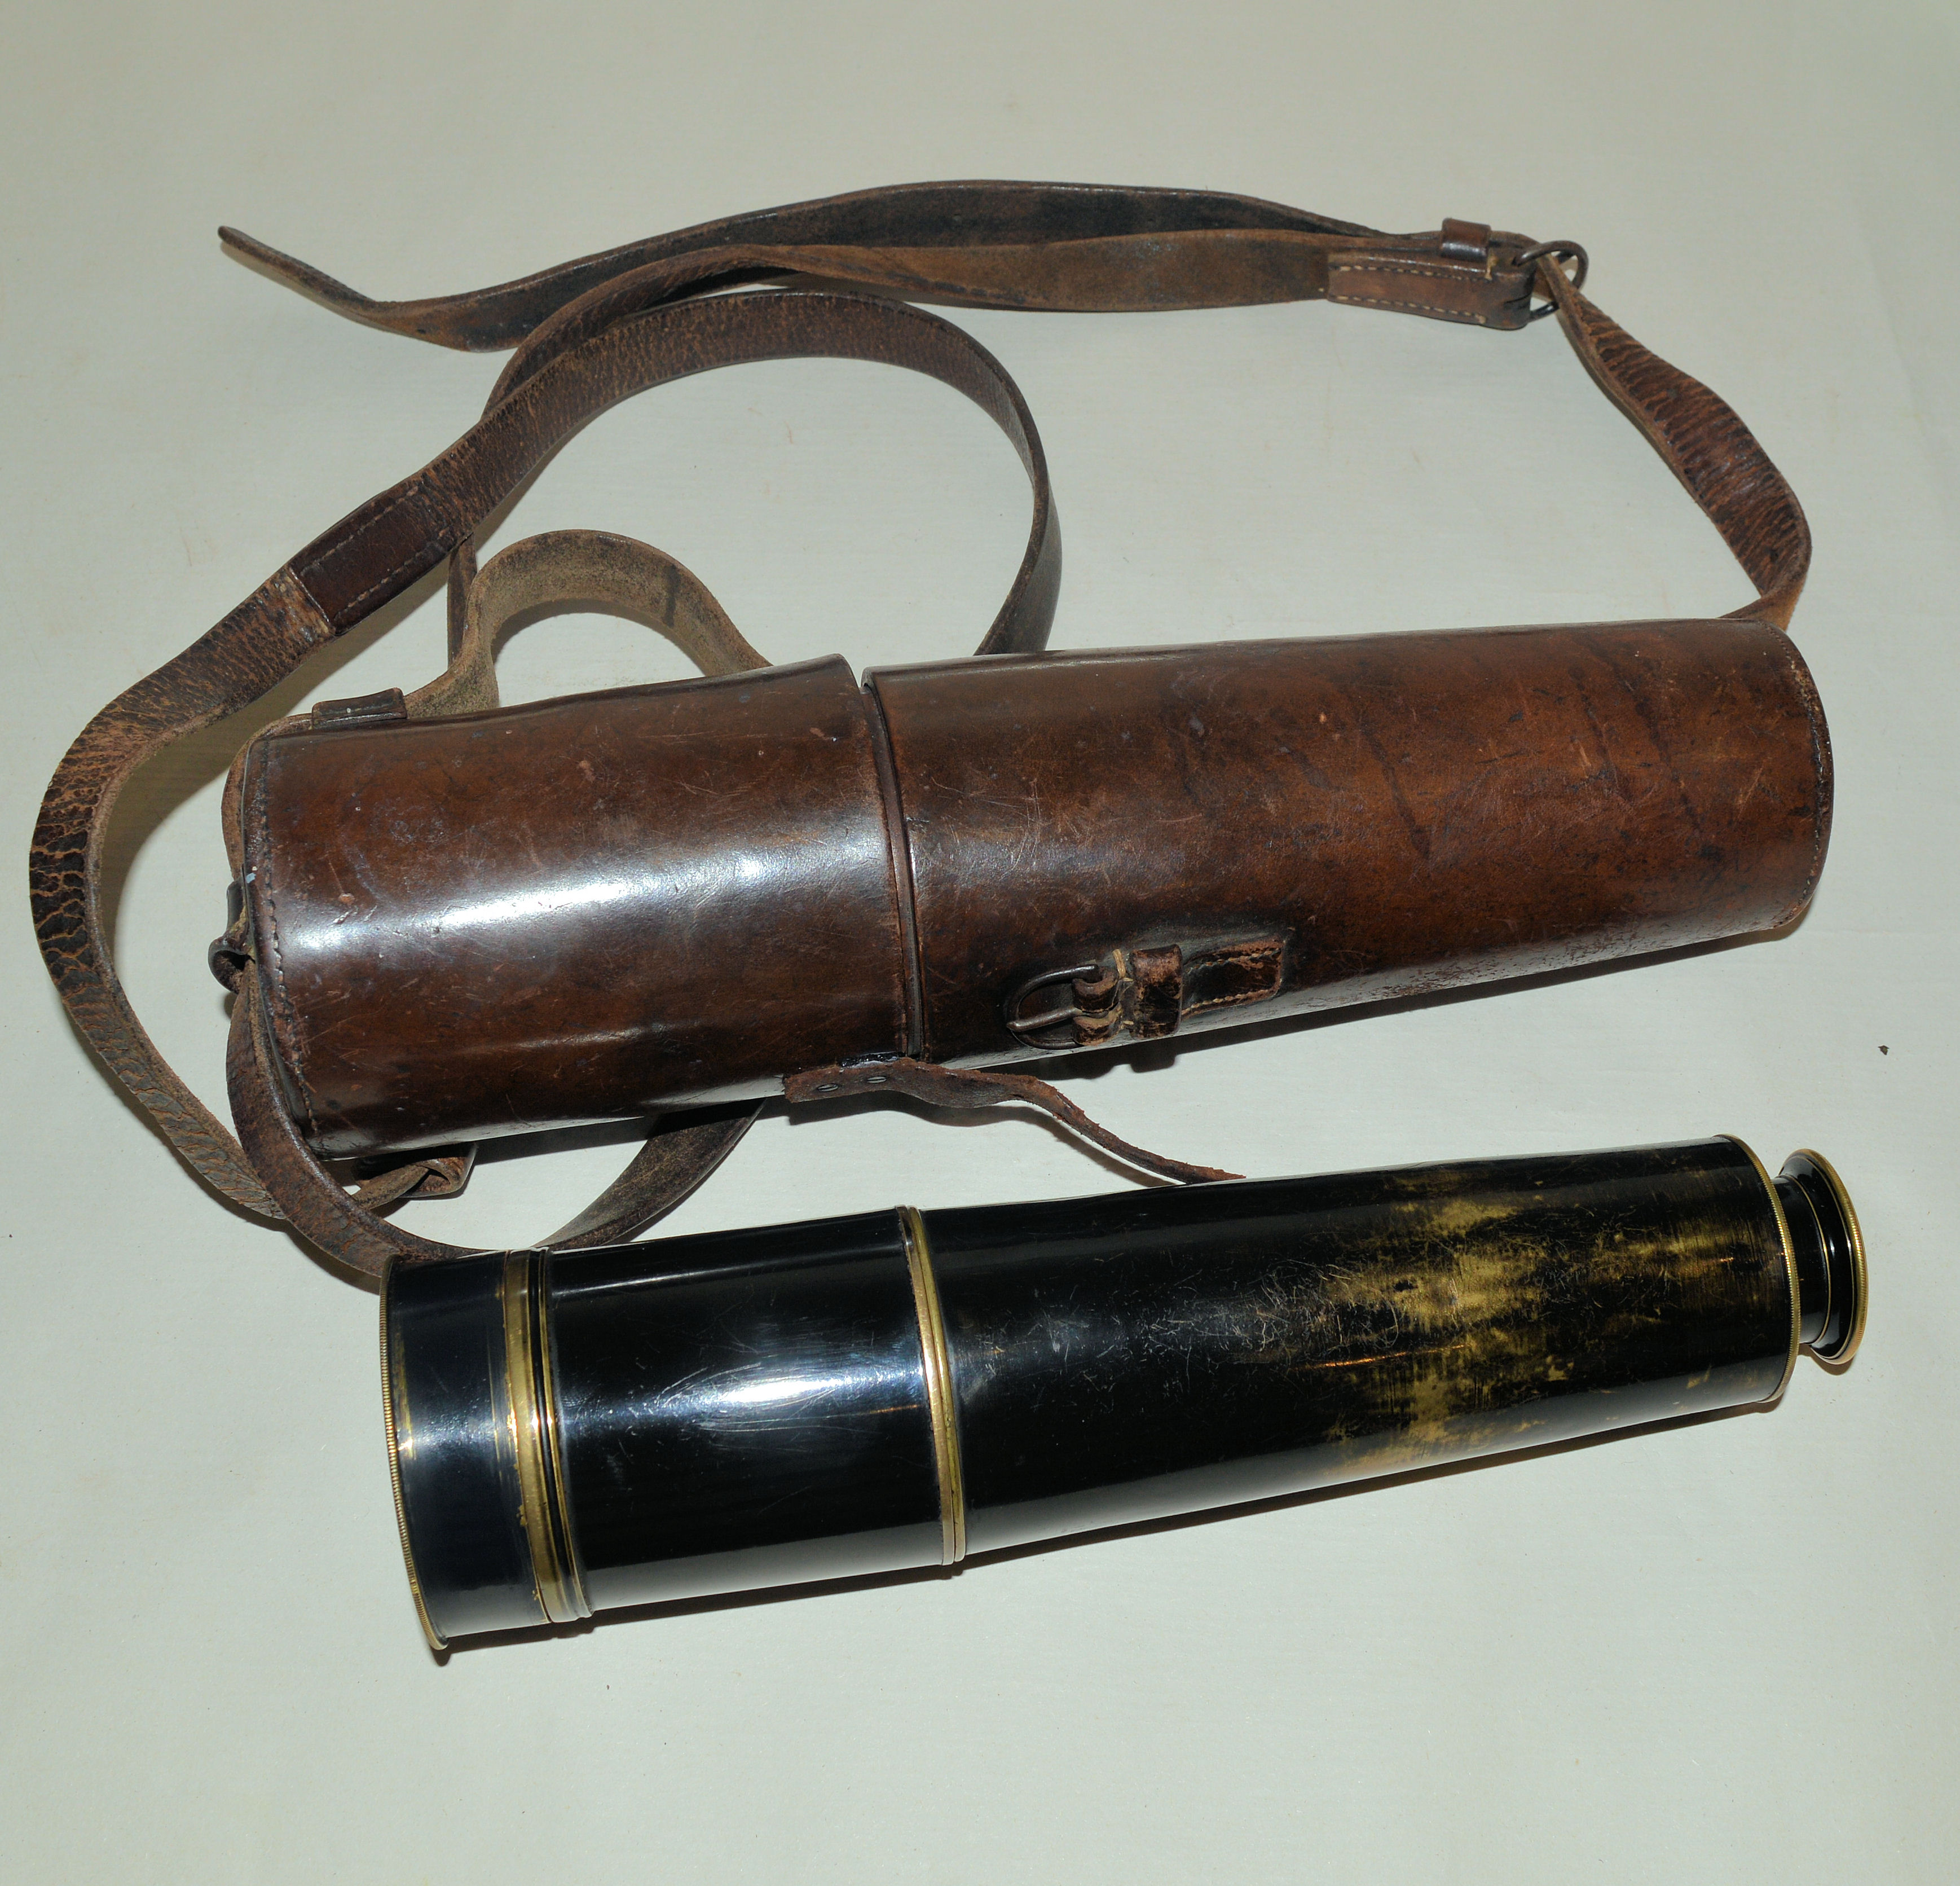 Military telescope – Captain A. Foster, Kings Royal Rifles